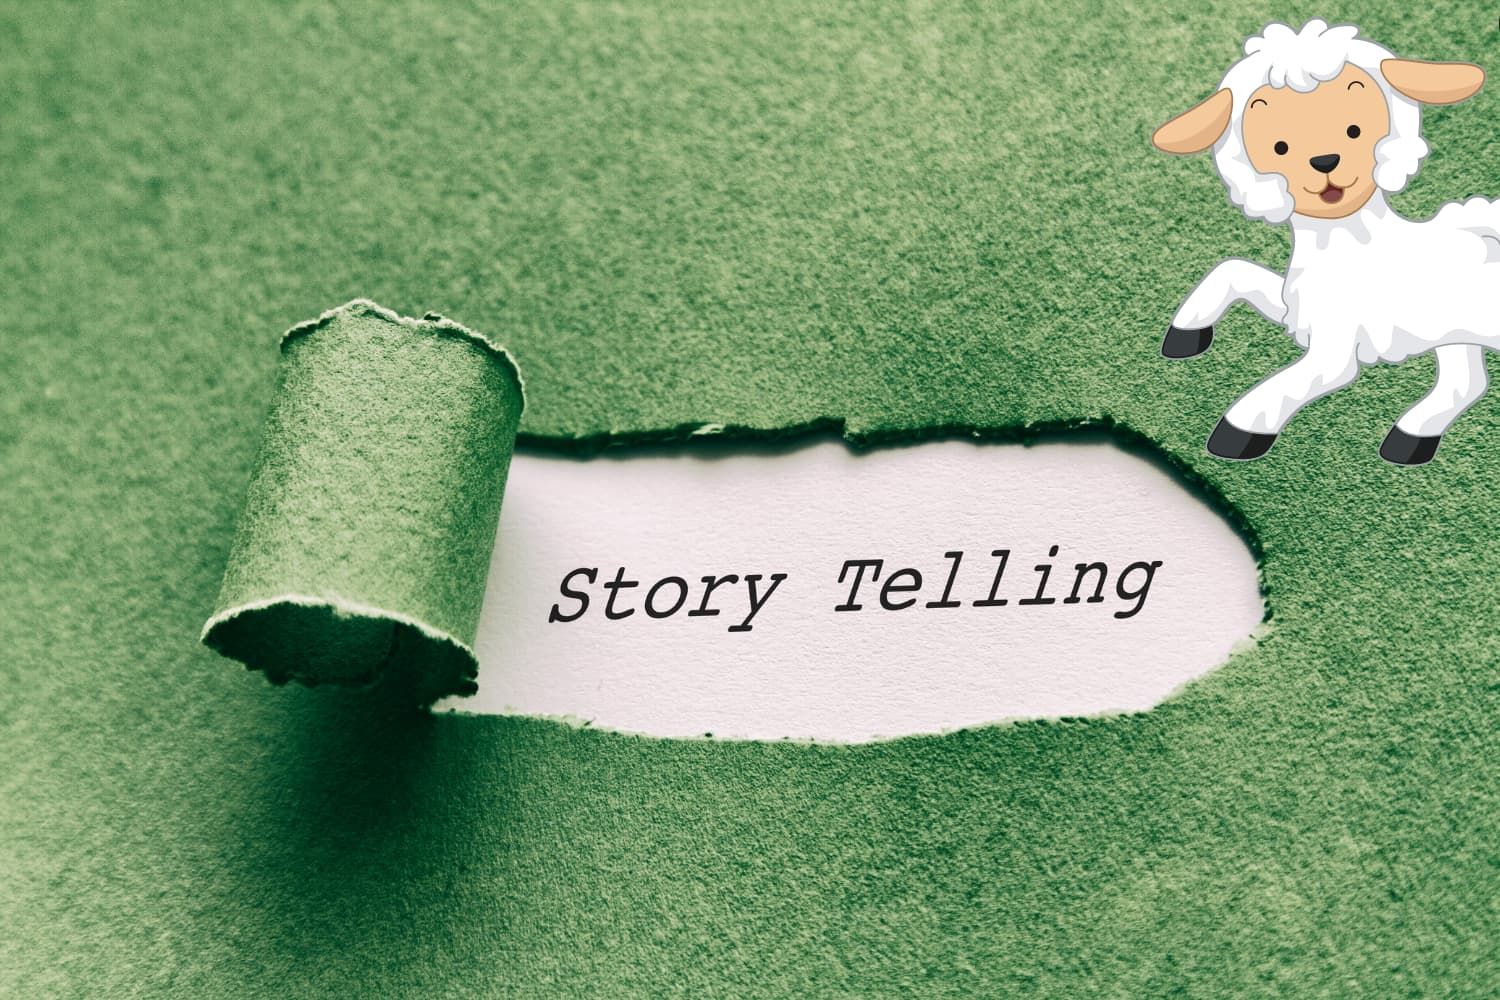 Storytelling%20tips%20-%20NT%20Parable%20of%20the%20lost%20sheep%20-%20Four%20tips%20to%20help%20you%20tell%20the%20story-0b70d295 Jesus (of Nazareth)